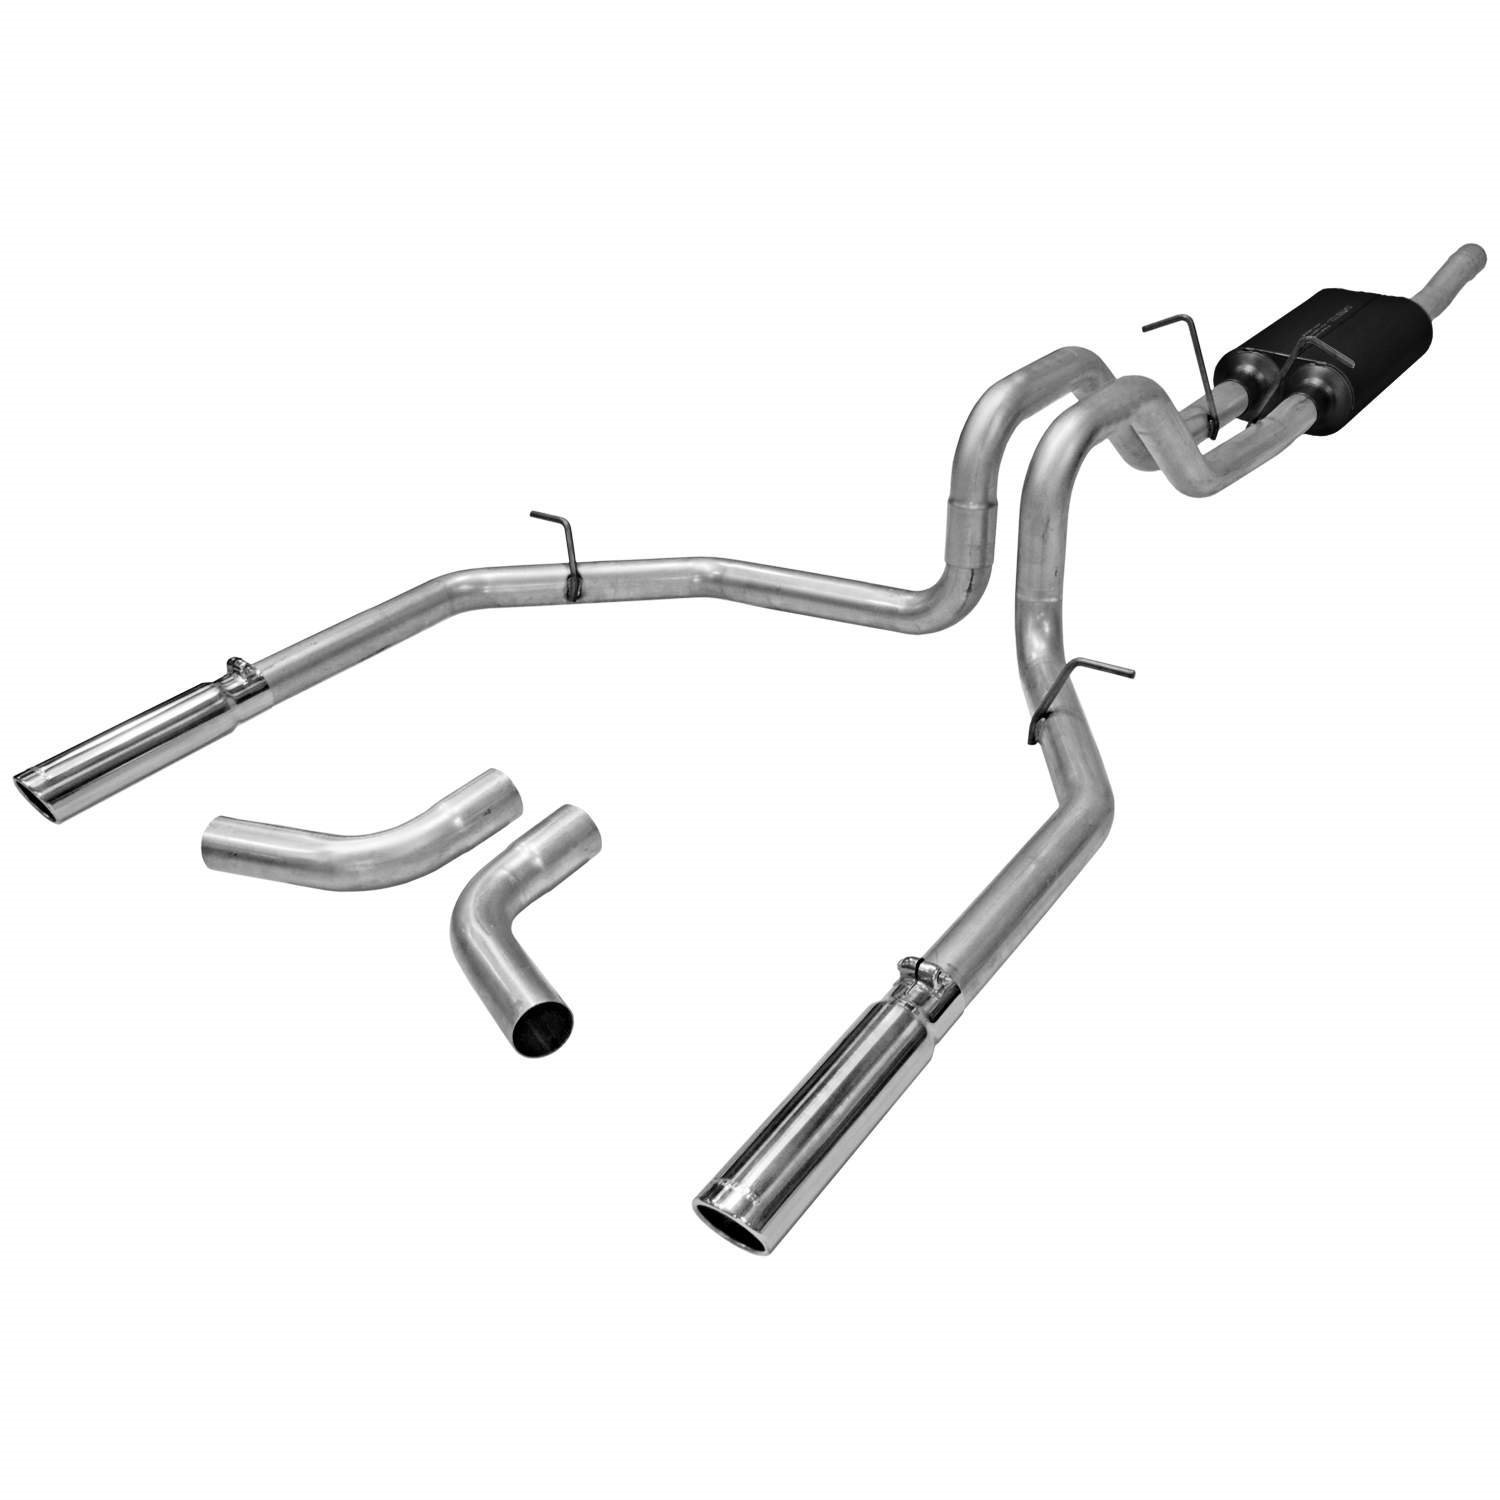 Force II Cat-Back Exhaust System 1998-2003 Ford F-150 4.6L/5.4L